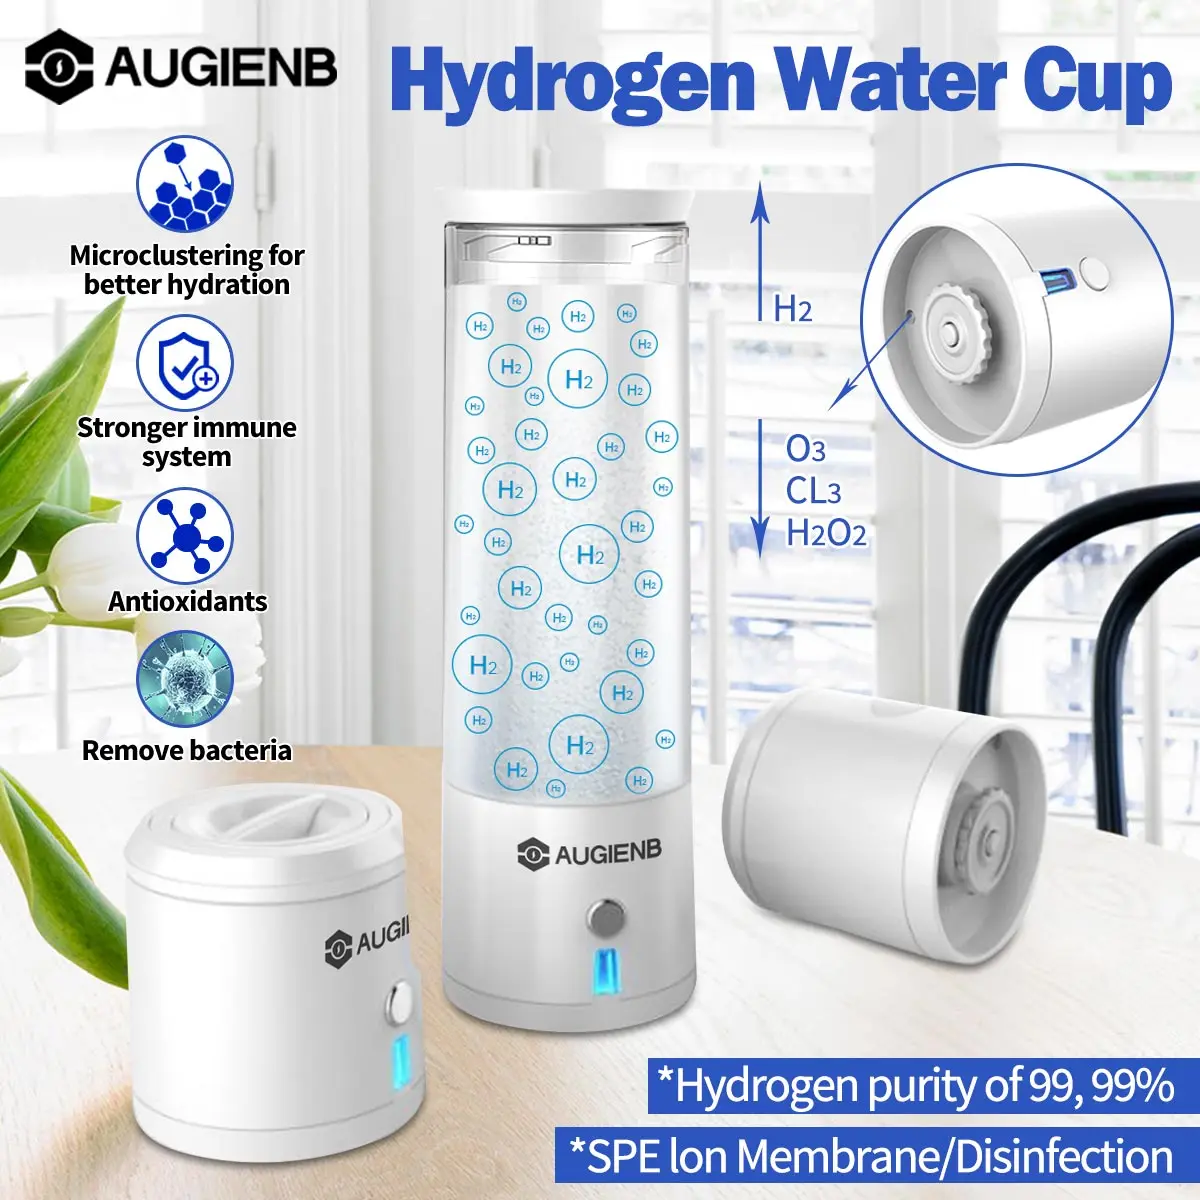 

AUGIENB SPE PEM Hydroge Rich Water Bottle 300ml Ionizer Generator Maker Energy Cup BPA-free Anti-Aging Rechargeable Healthy Gift